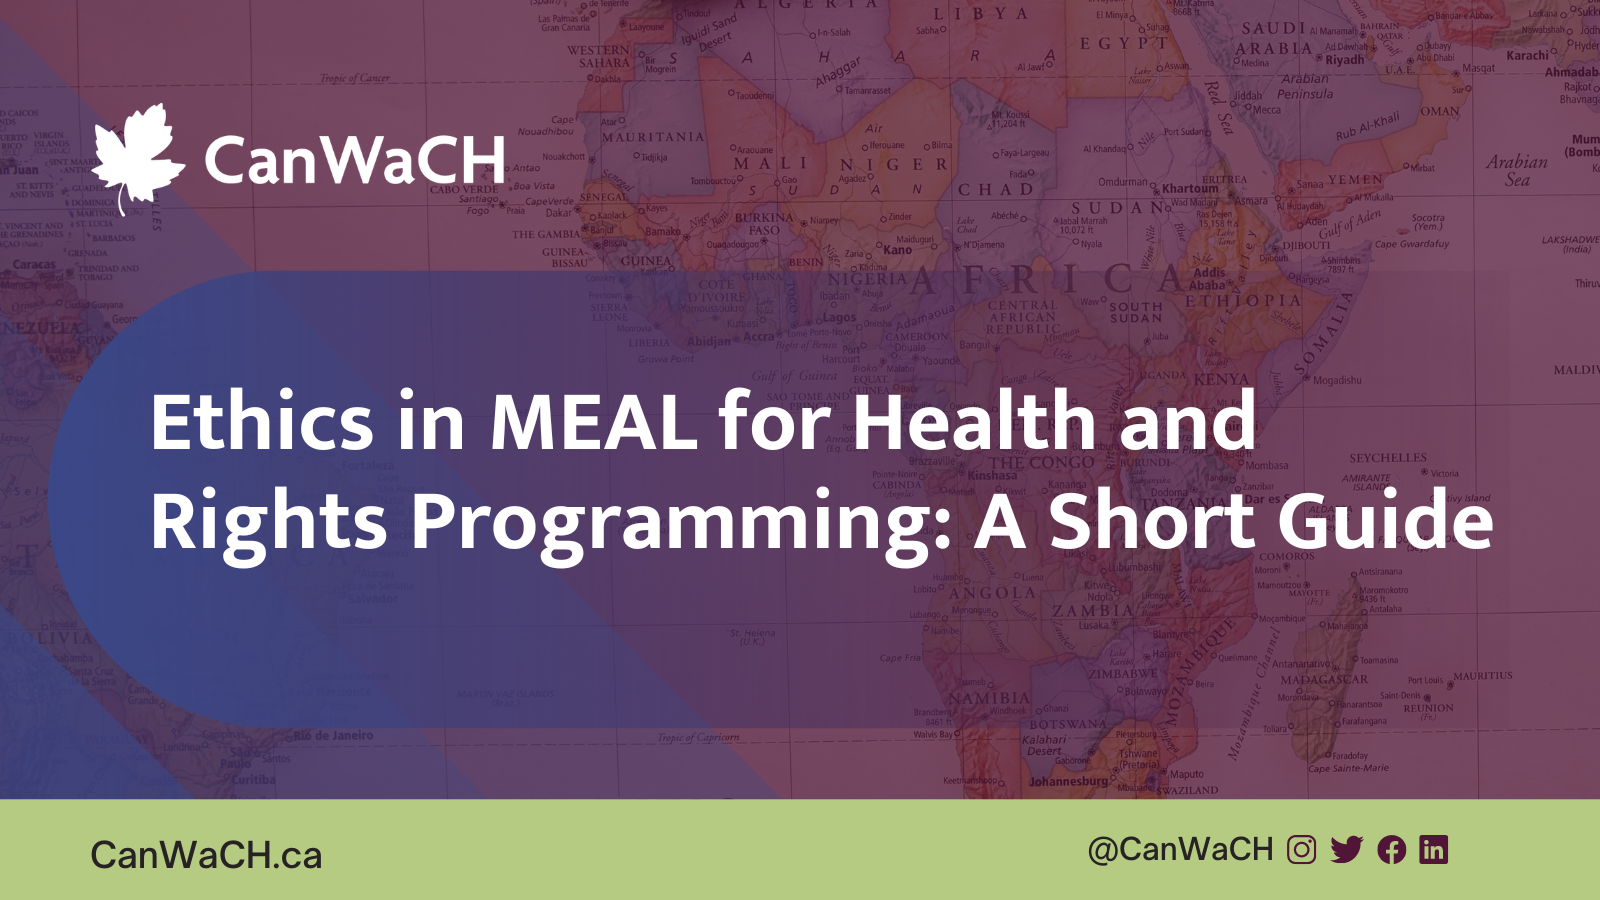 Introducing Ethics in MEAL for Health and Rights Programming: A Short Guide